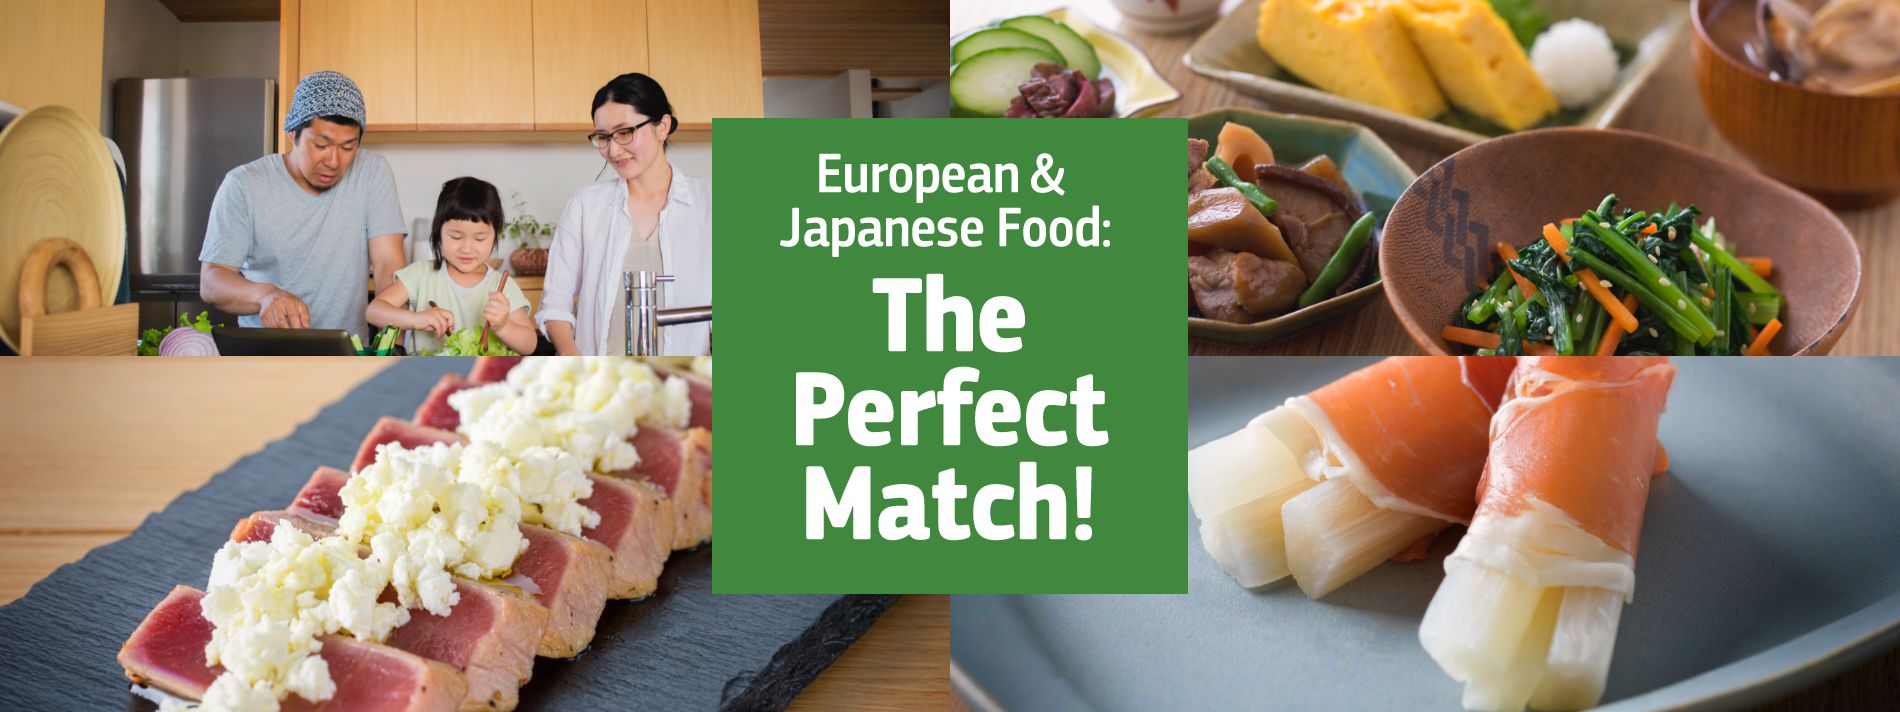 European & Japanese Food: The Perfect Match!